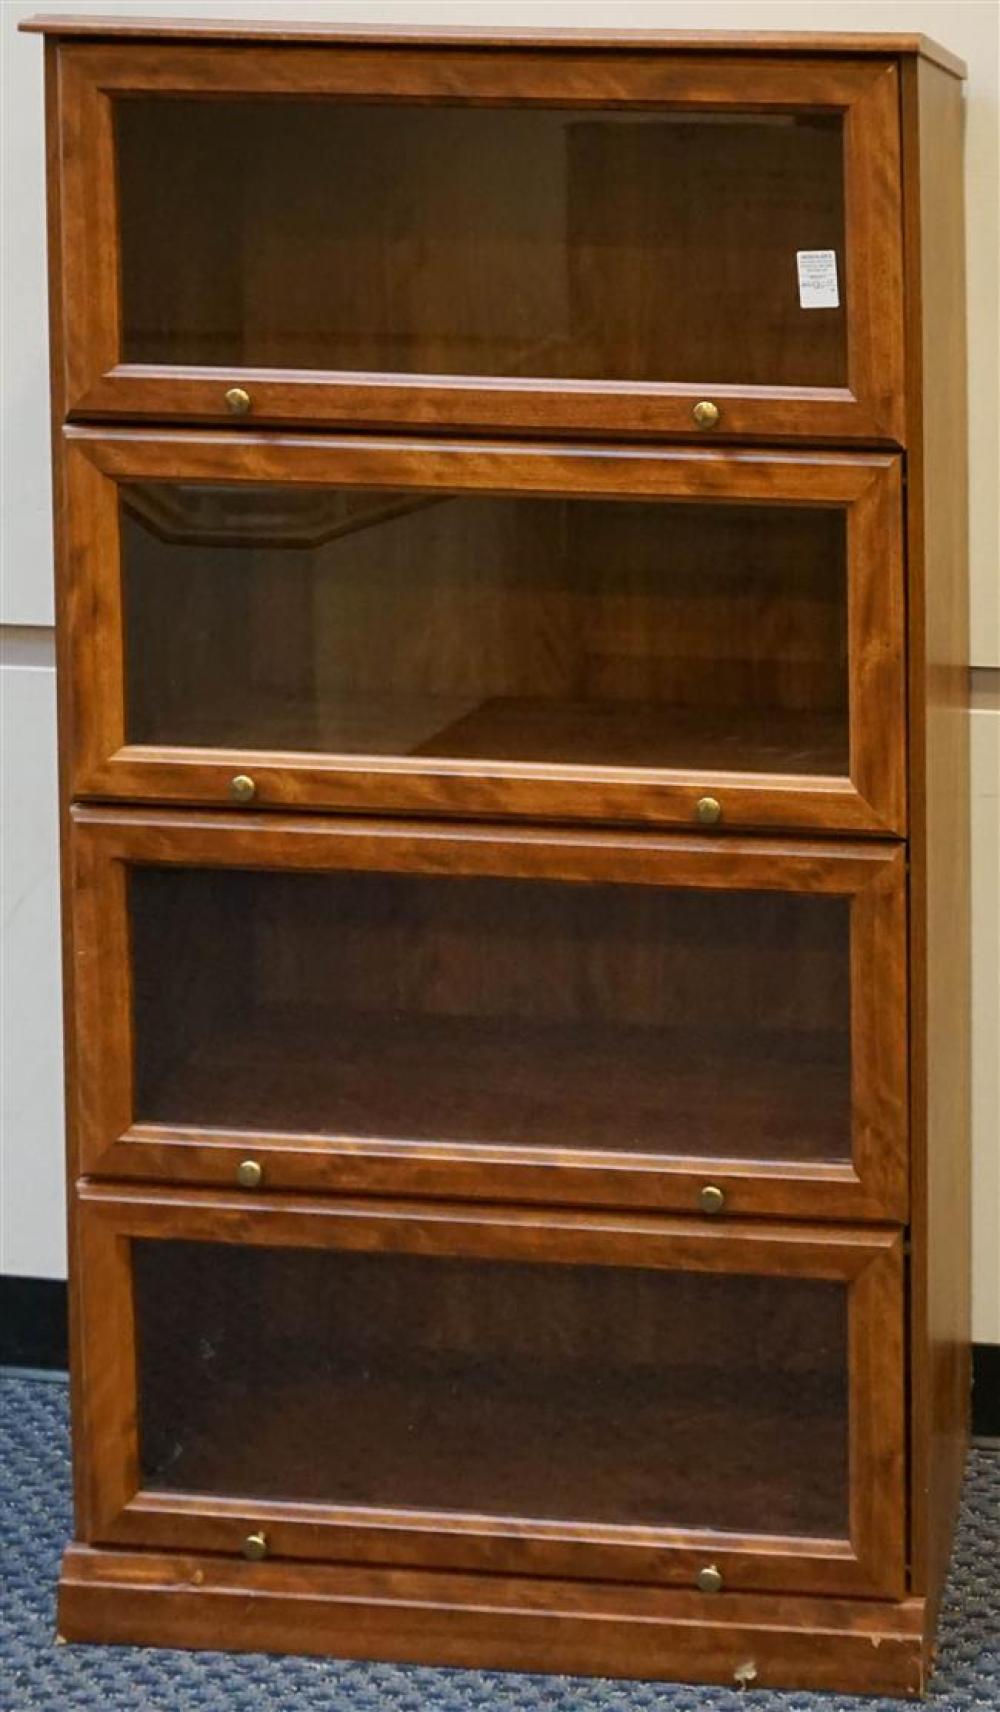 MAPLE FINISH BARRISTER STYLE BOOKCASES,